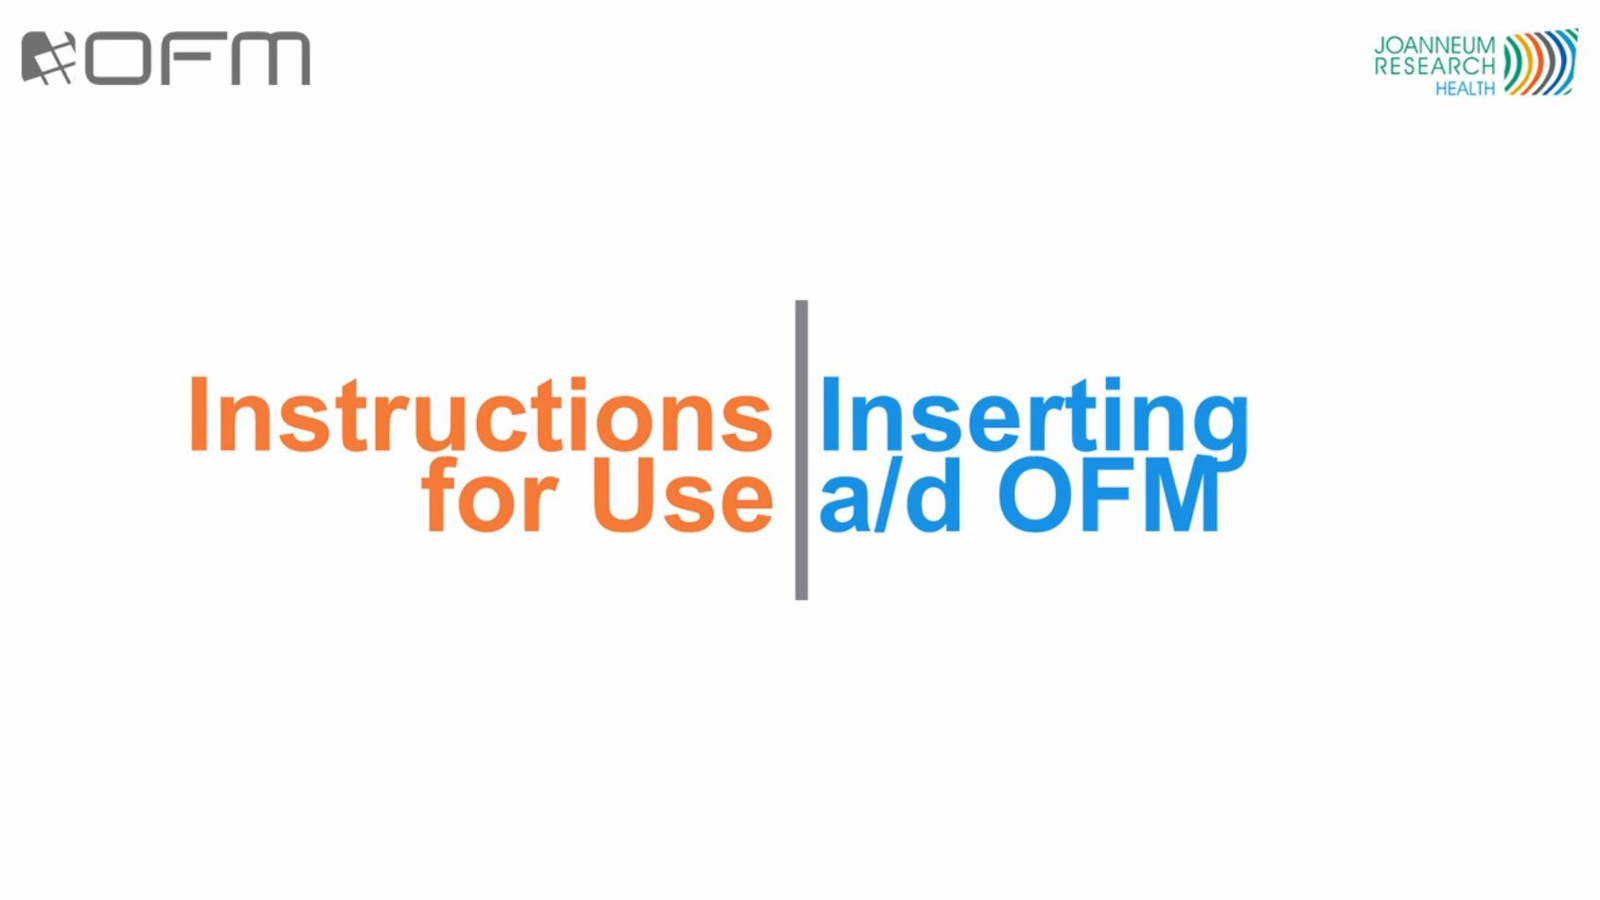 Inserting a/d OFM